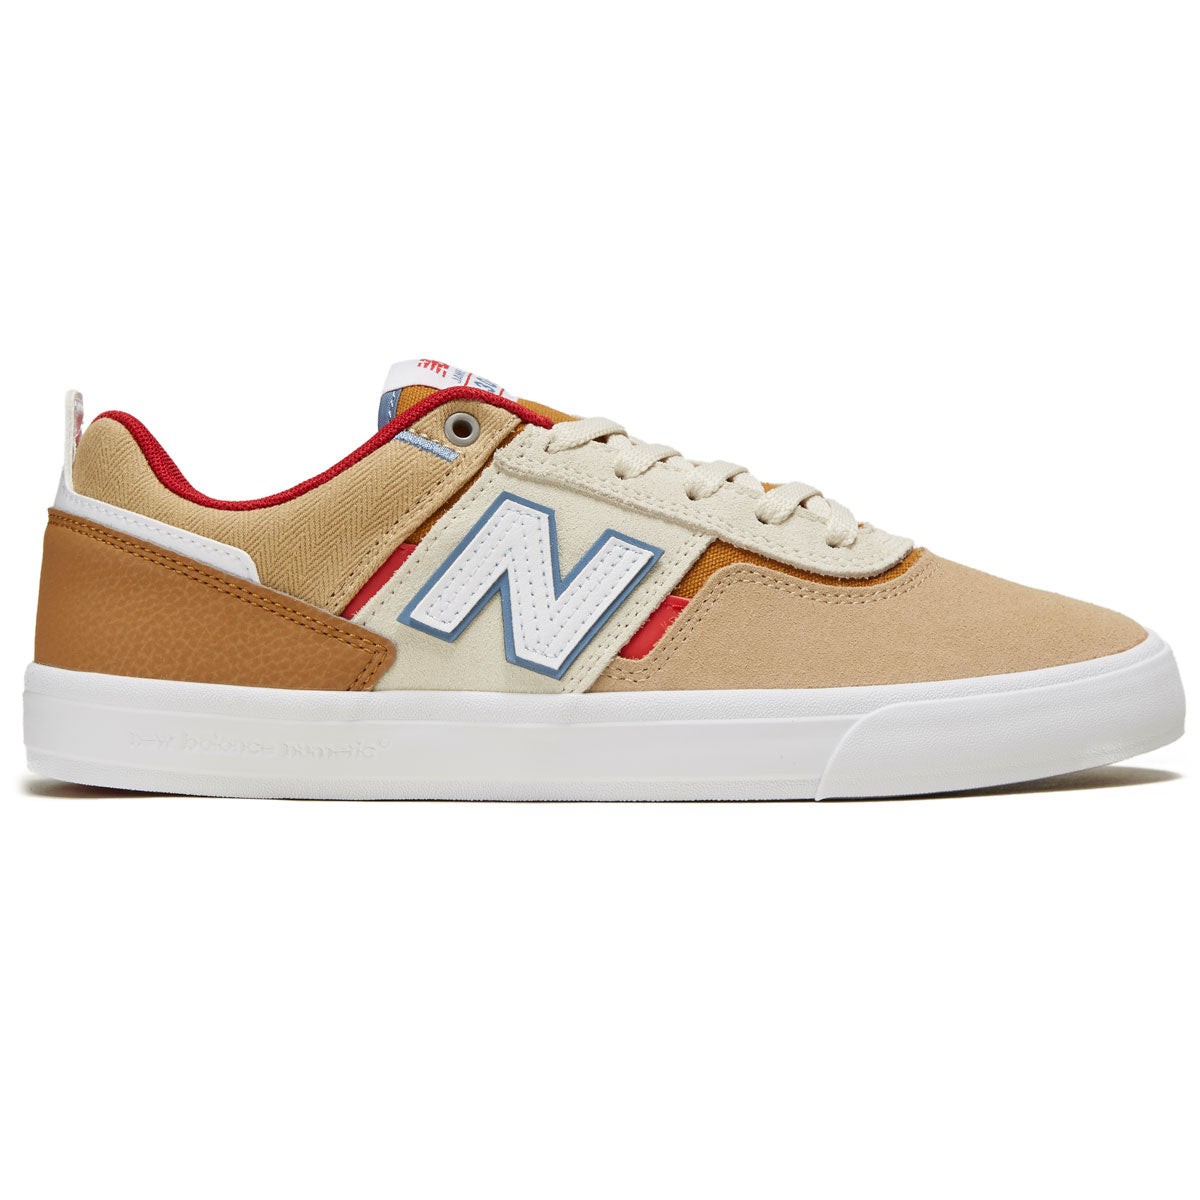 New Balance 306 Foy Shoes - Tan/Red image 1